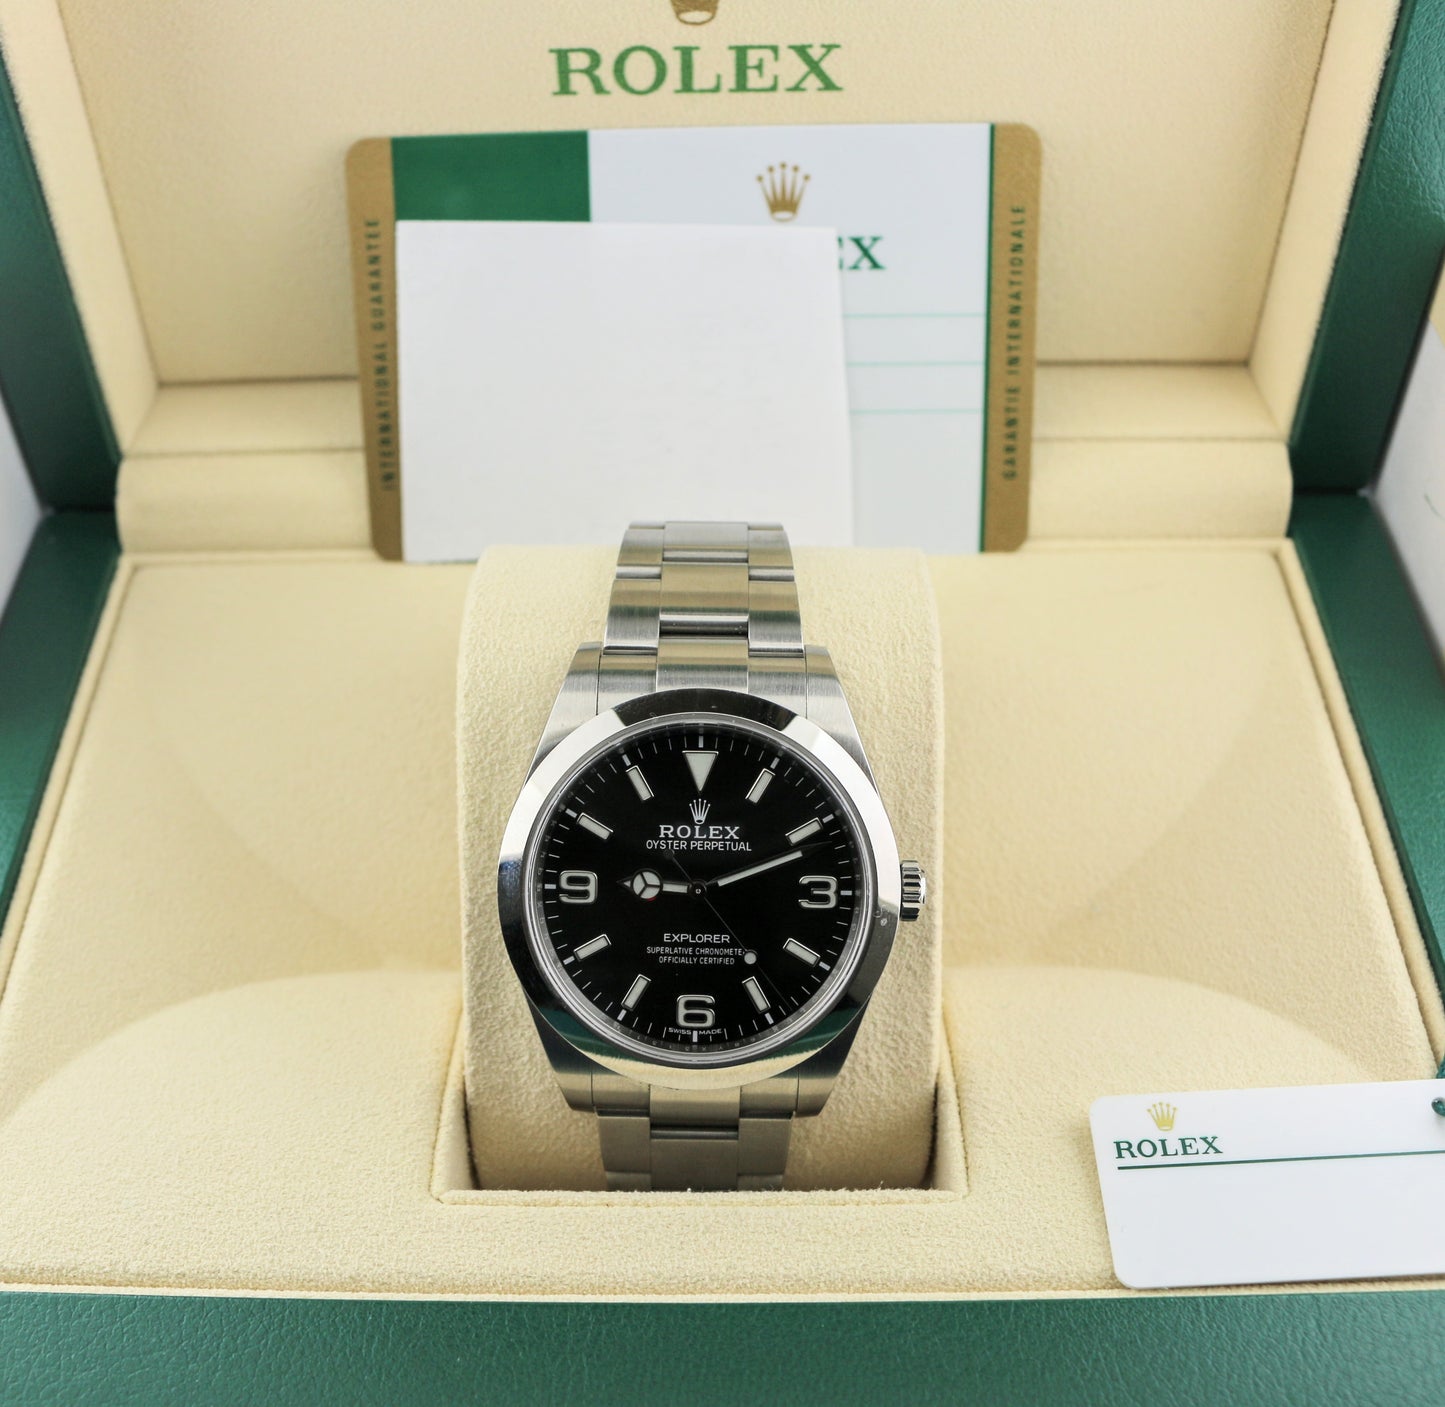 2018 Rolex Explorer 214270 Black Dial MK2 Full Lume SS Oyster With Papers 40mm